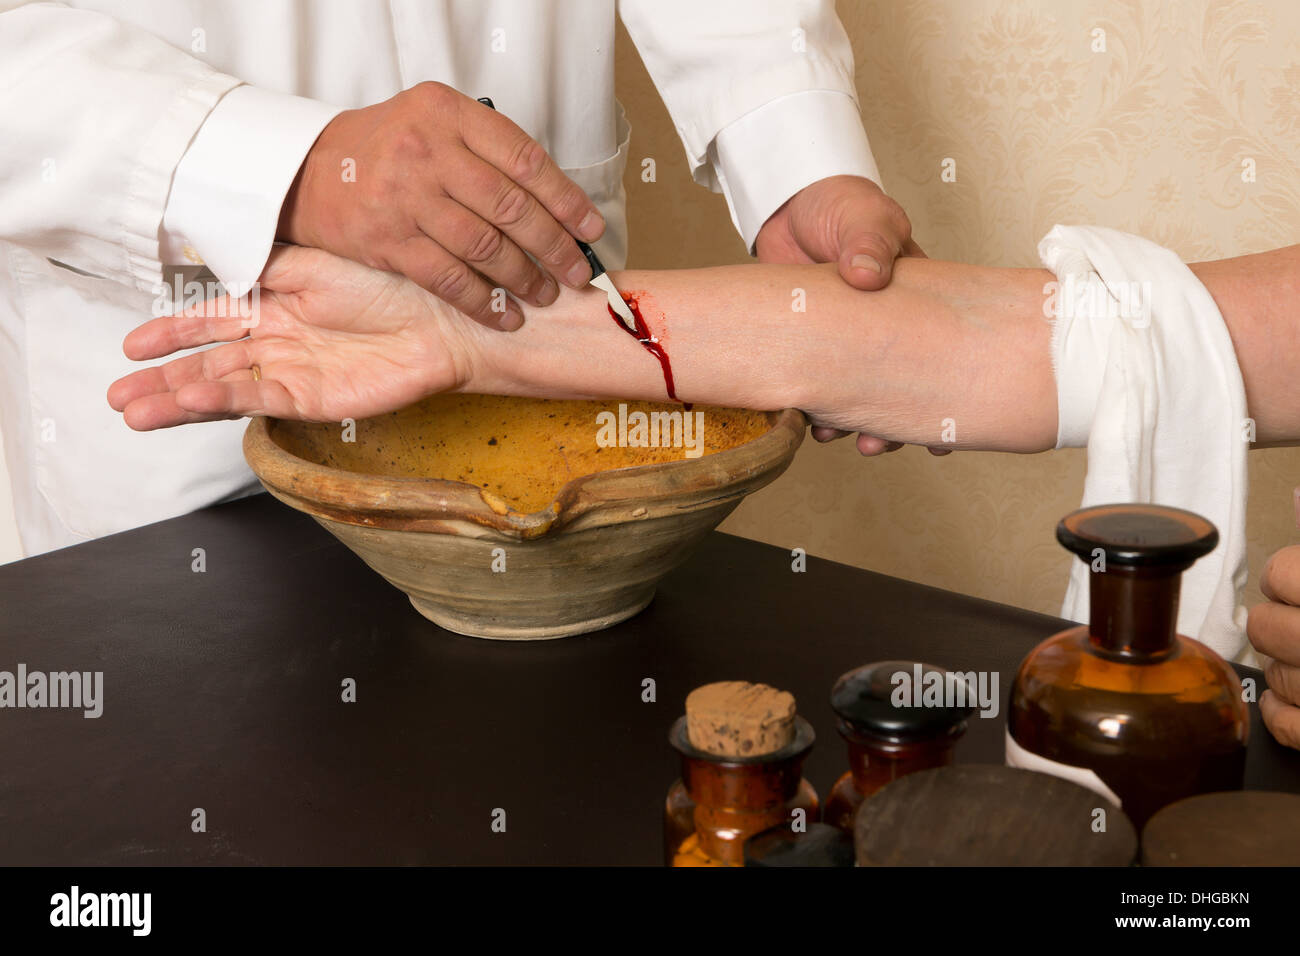 Reenactment of the antique medical procedure of blood letting or bleeding a patient Stock Photo